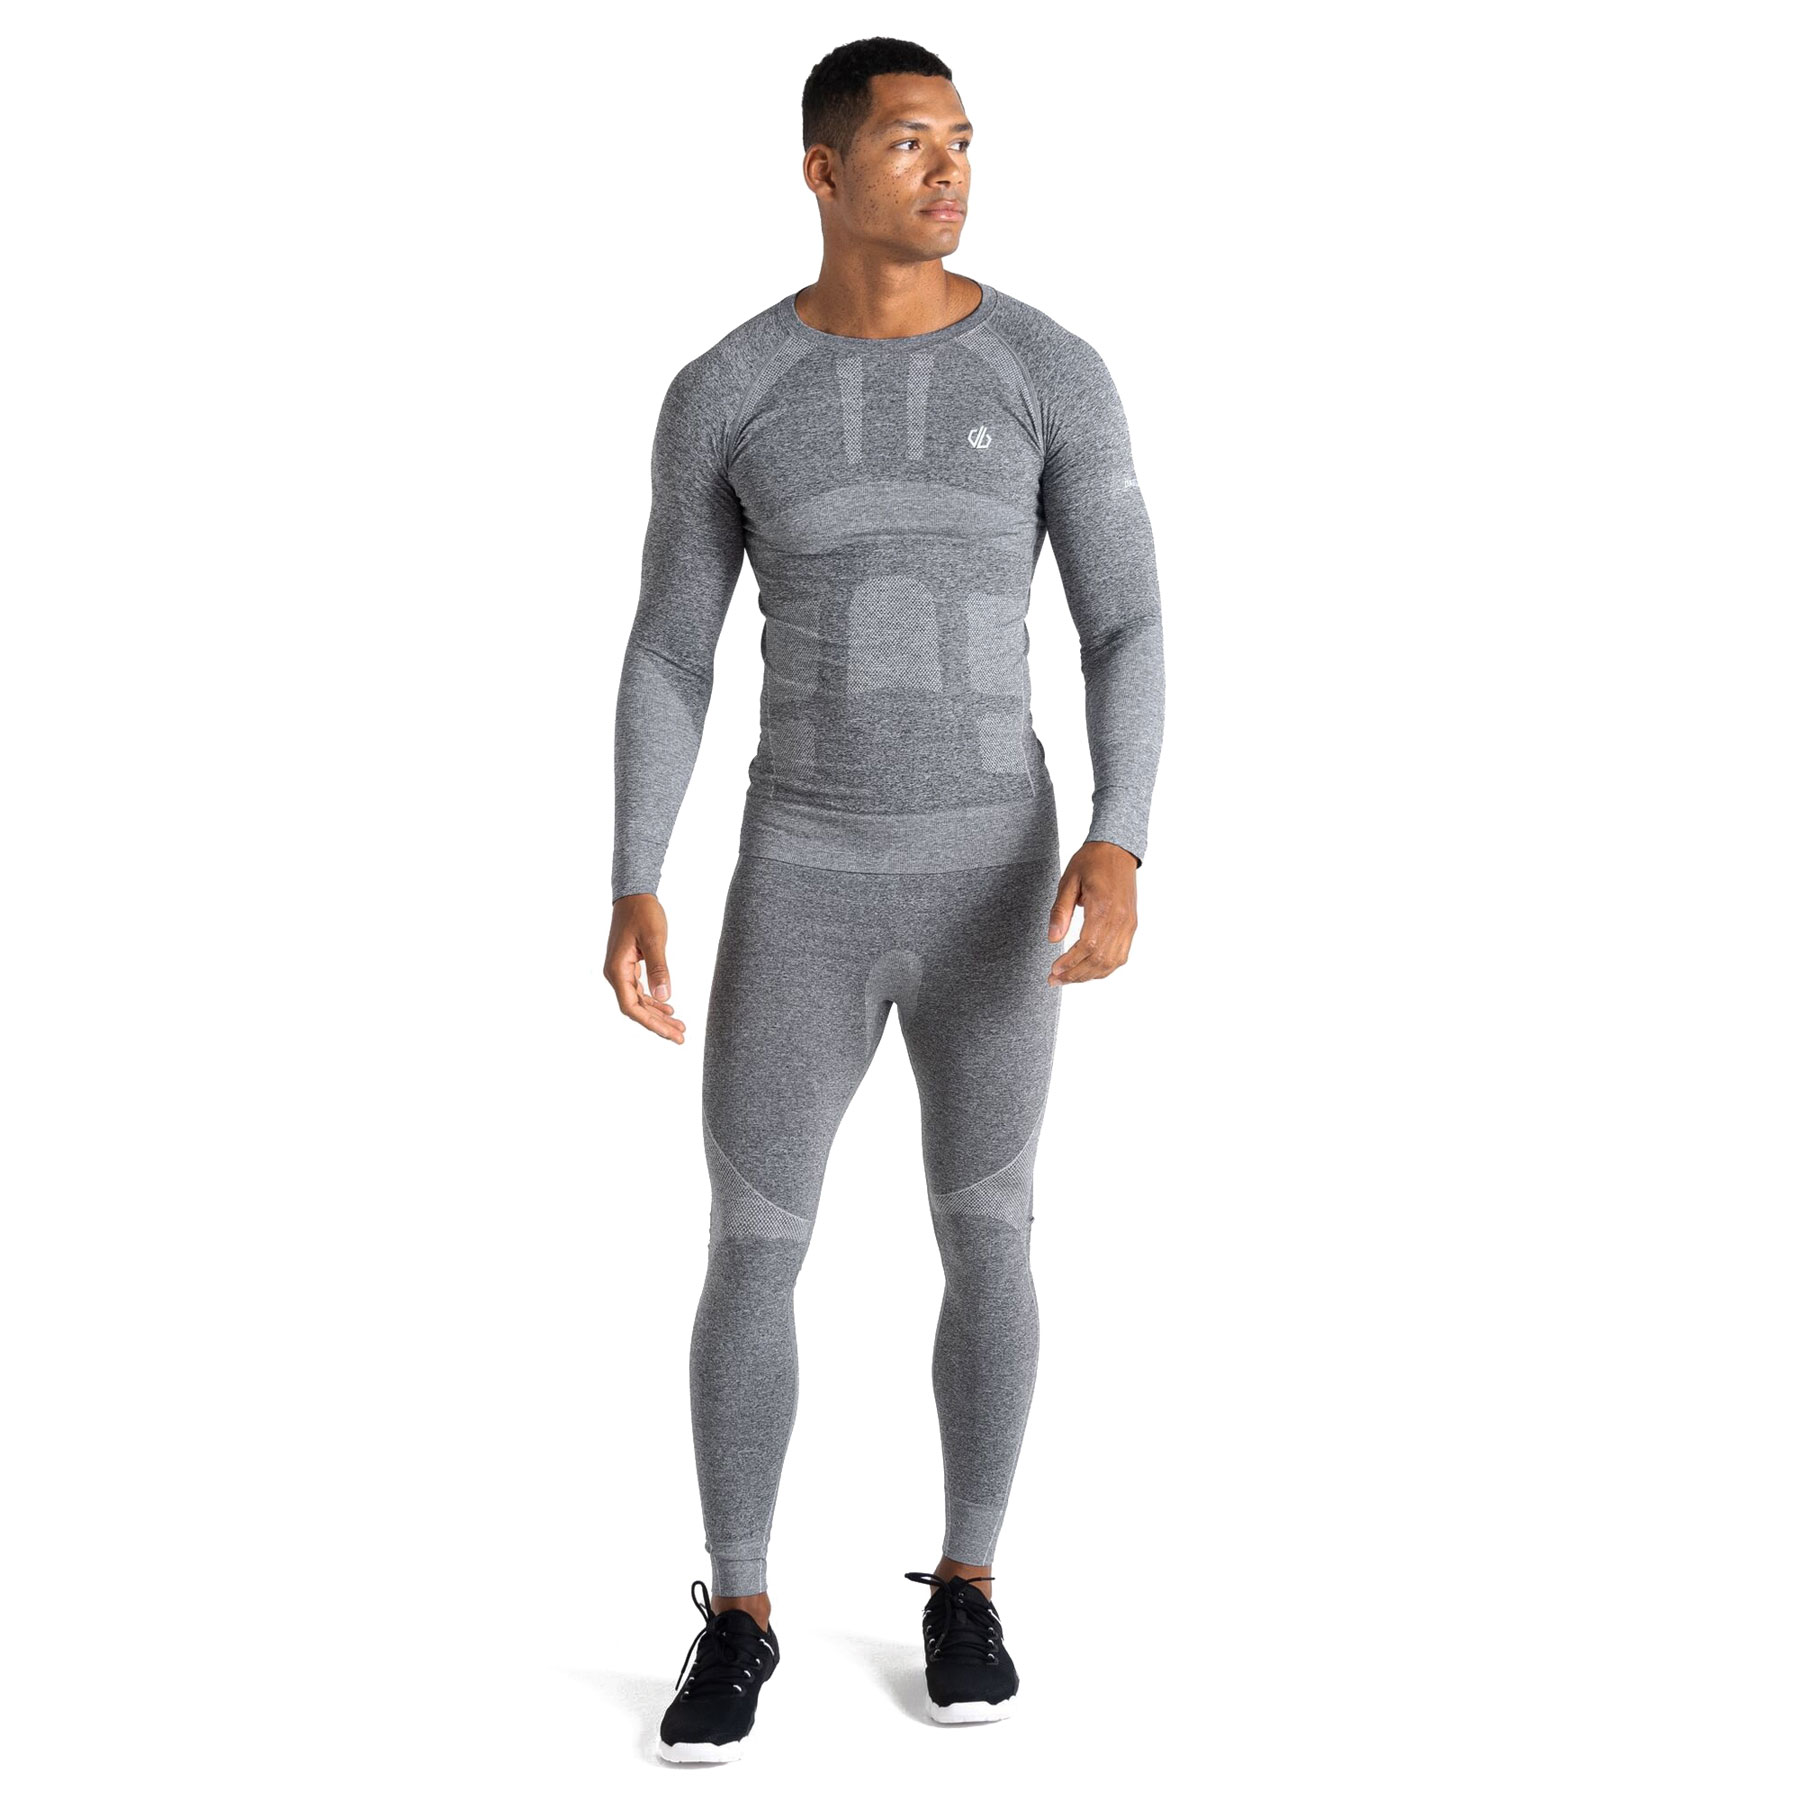 Picture of Dare 2b In The Zone II Baselayer Set - R39 Charcoal Grey Marl